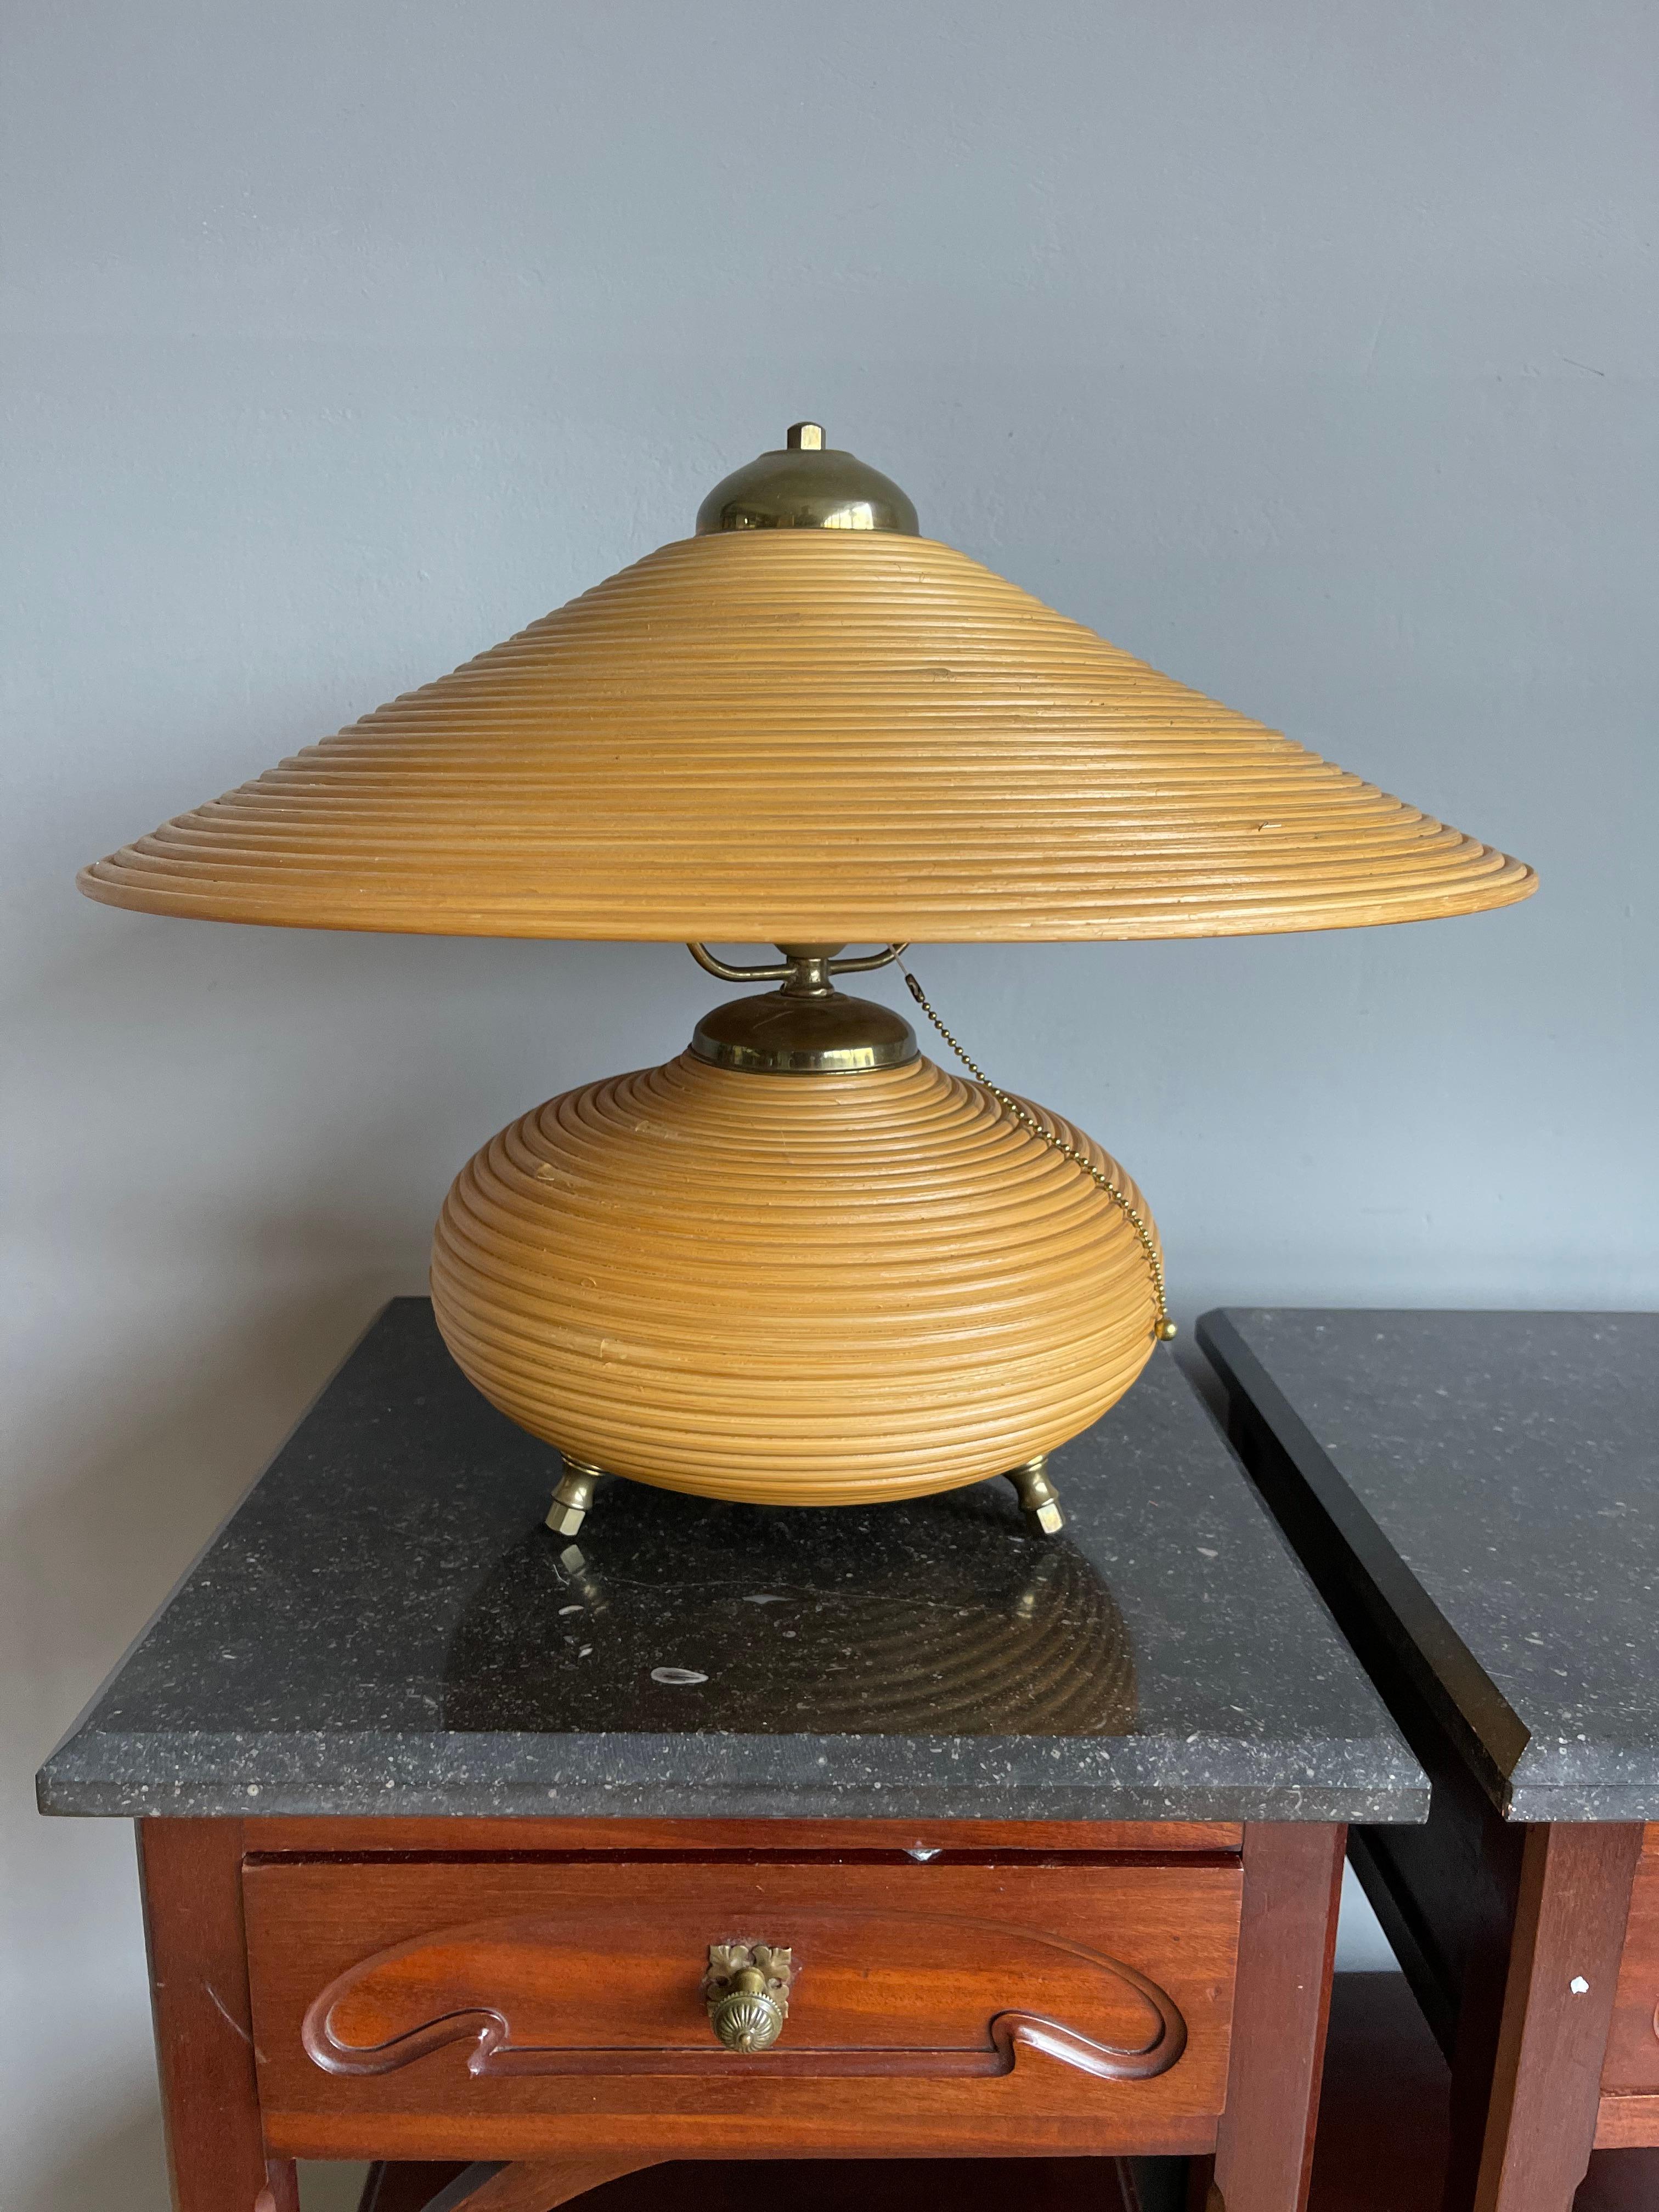 Rare Midcentury design table lamp.

This 1960s table lamp is perfect for bringing light and a good atmosphere to your midcentury interior. This lamp has a beautifully shaped, circular rattan shade with an even more beautiful, rounded and matching